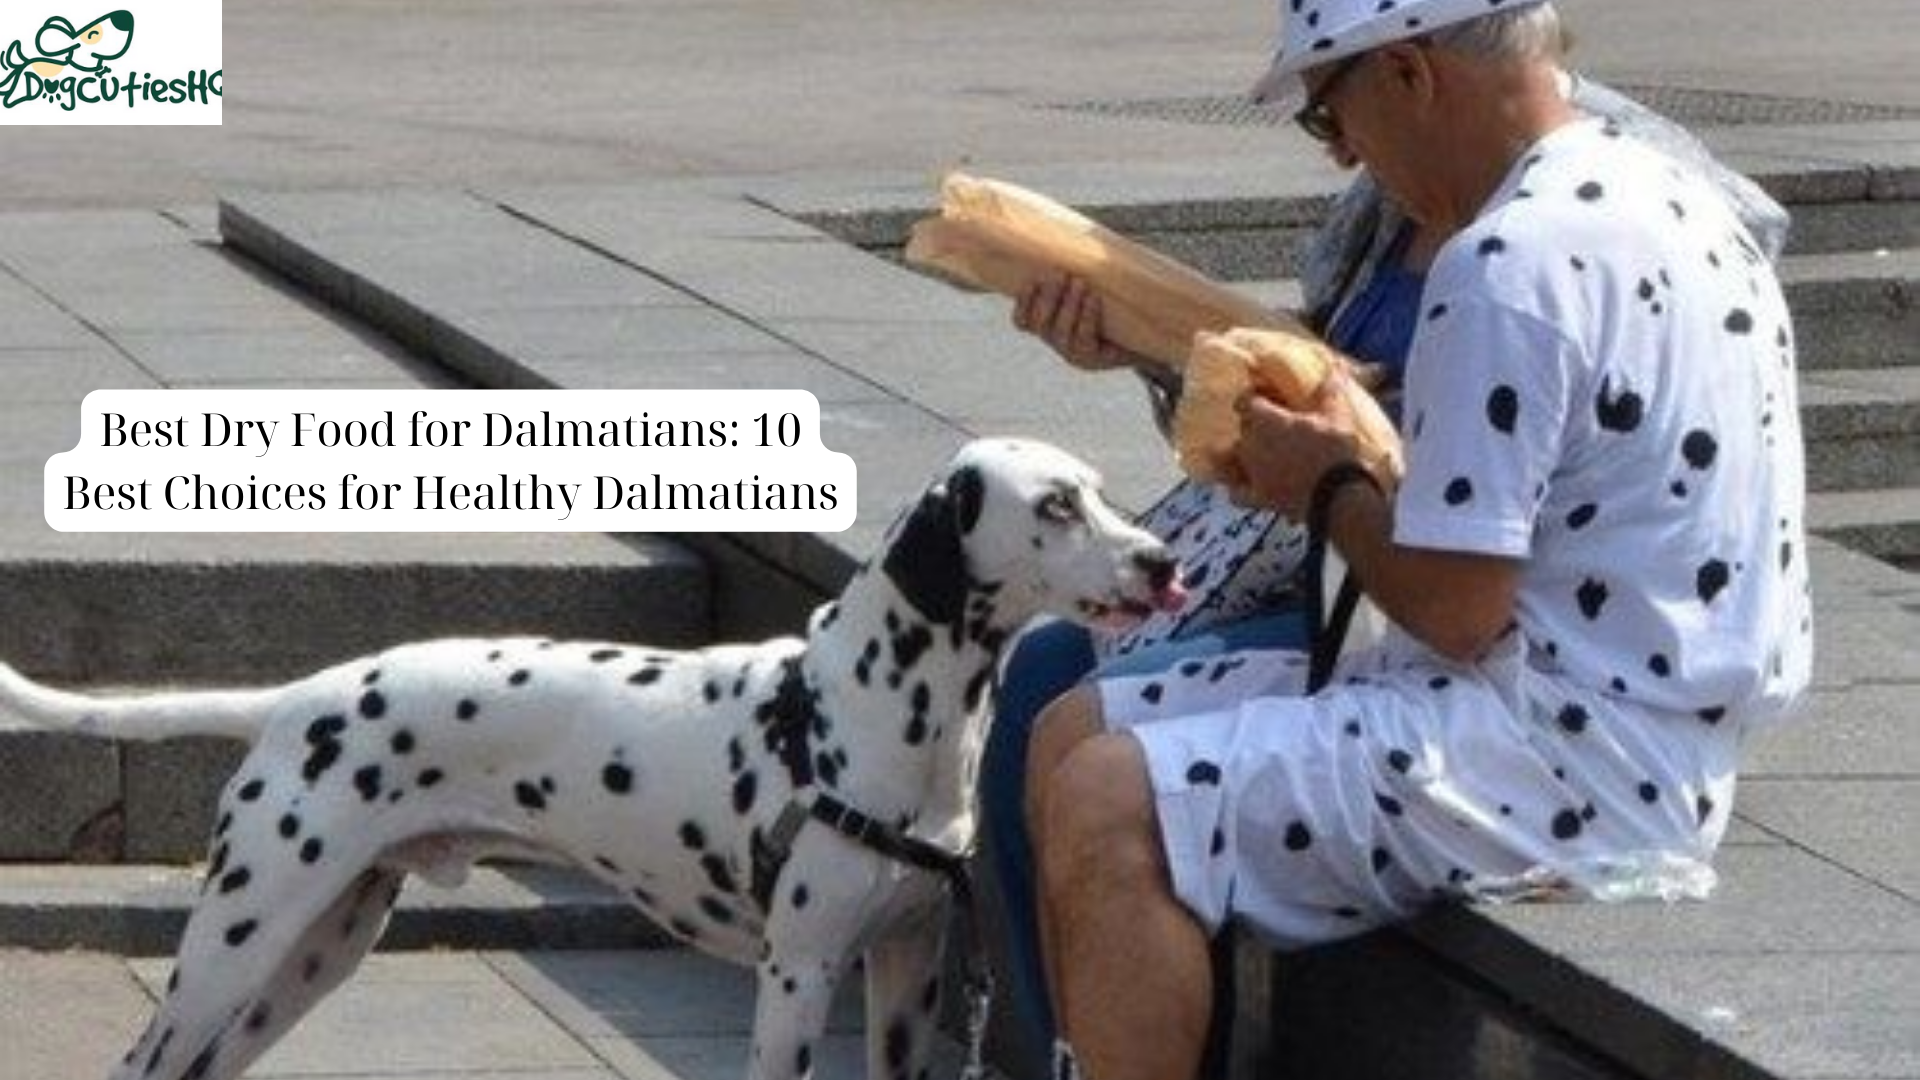 Best Dry Food for Dalmatians 10 Best Choices for Healthy Dalmatians (1)